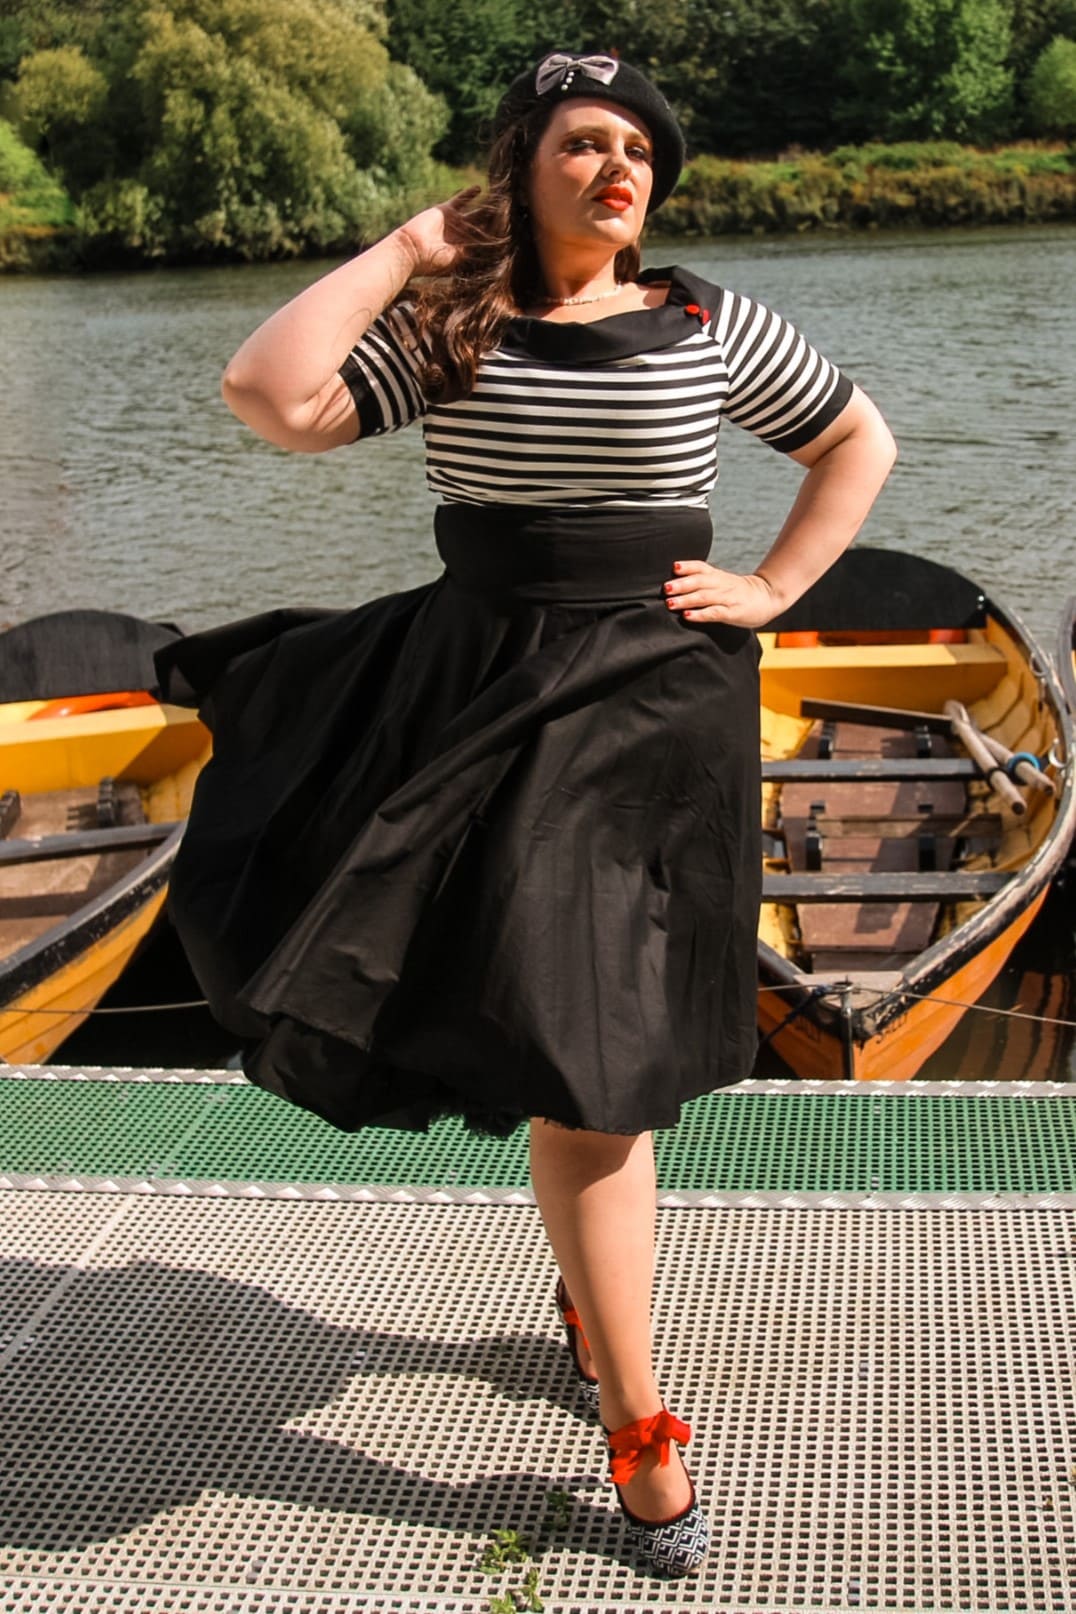 Woman wears our bateau neckline Darlene dress, in black and write stripes, with accessories, in front of a boating lake